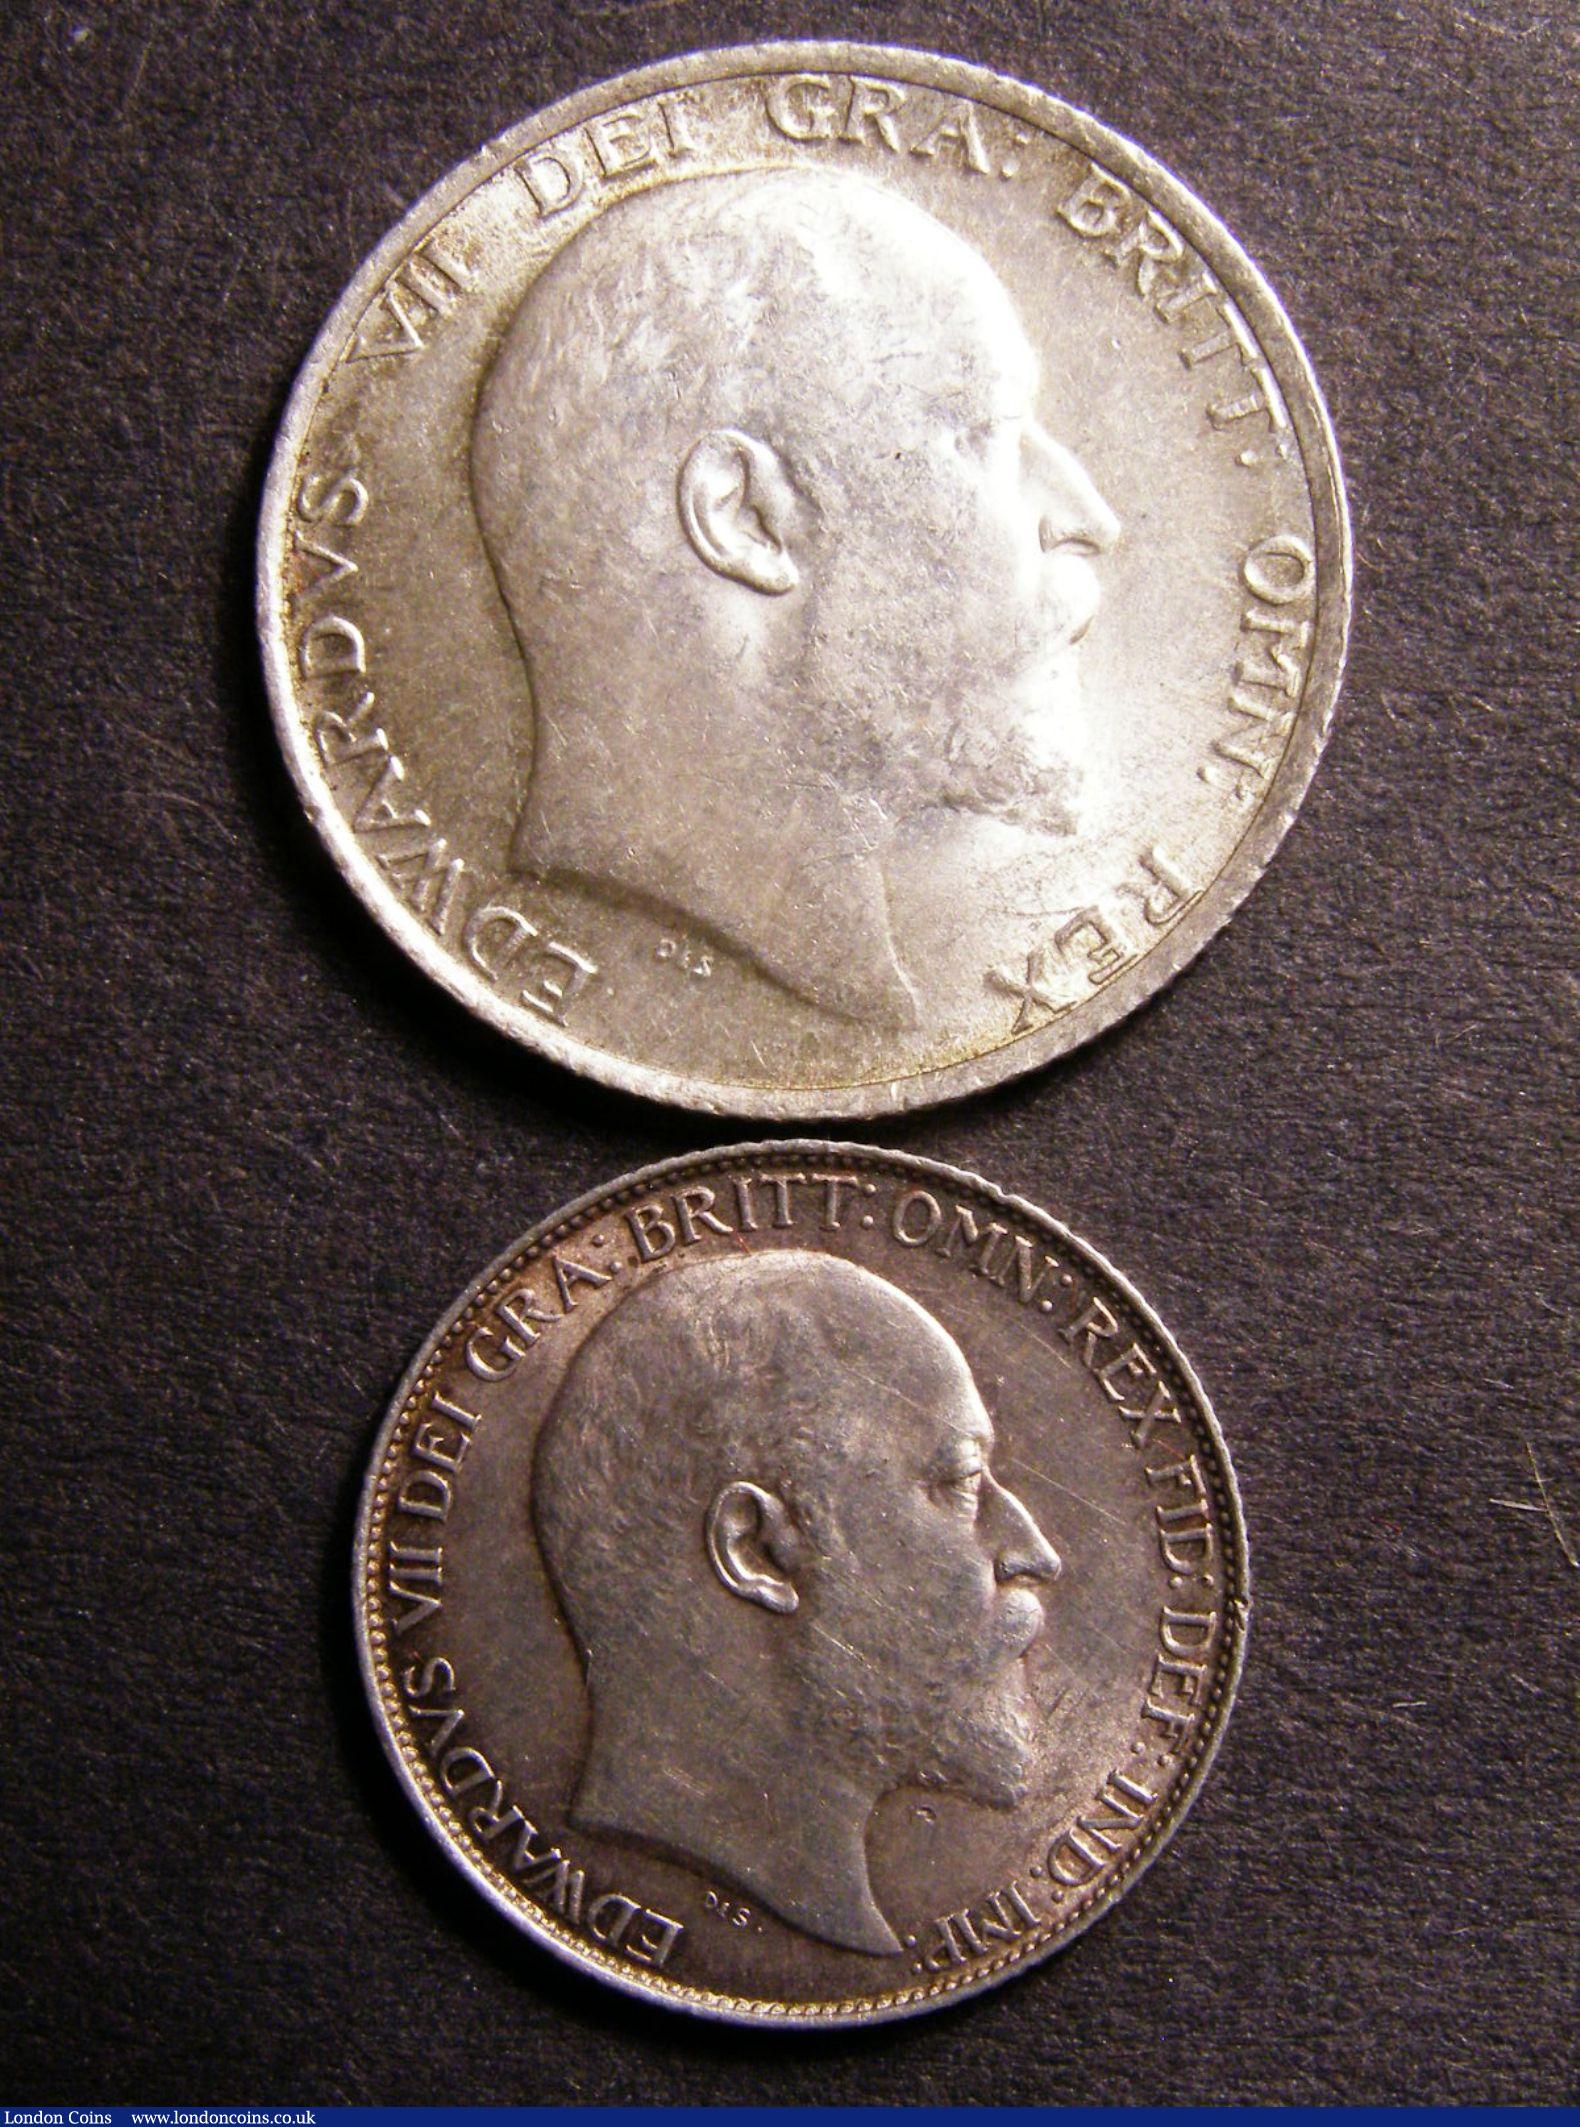 Shilling 1910 ESC 1419, Sixpence 1910 ESC 1794 both A/UNC the Shilling with a pleasant tone : English Coins : Auction 128 : Lot 1697